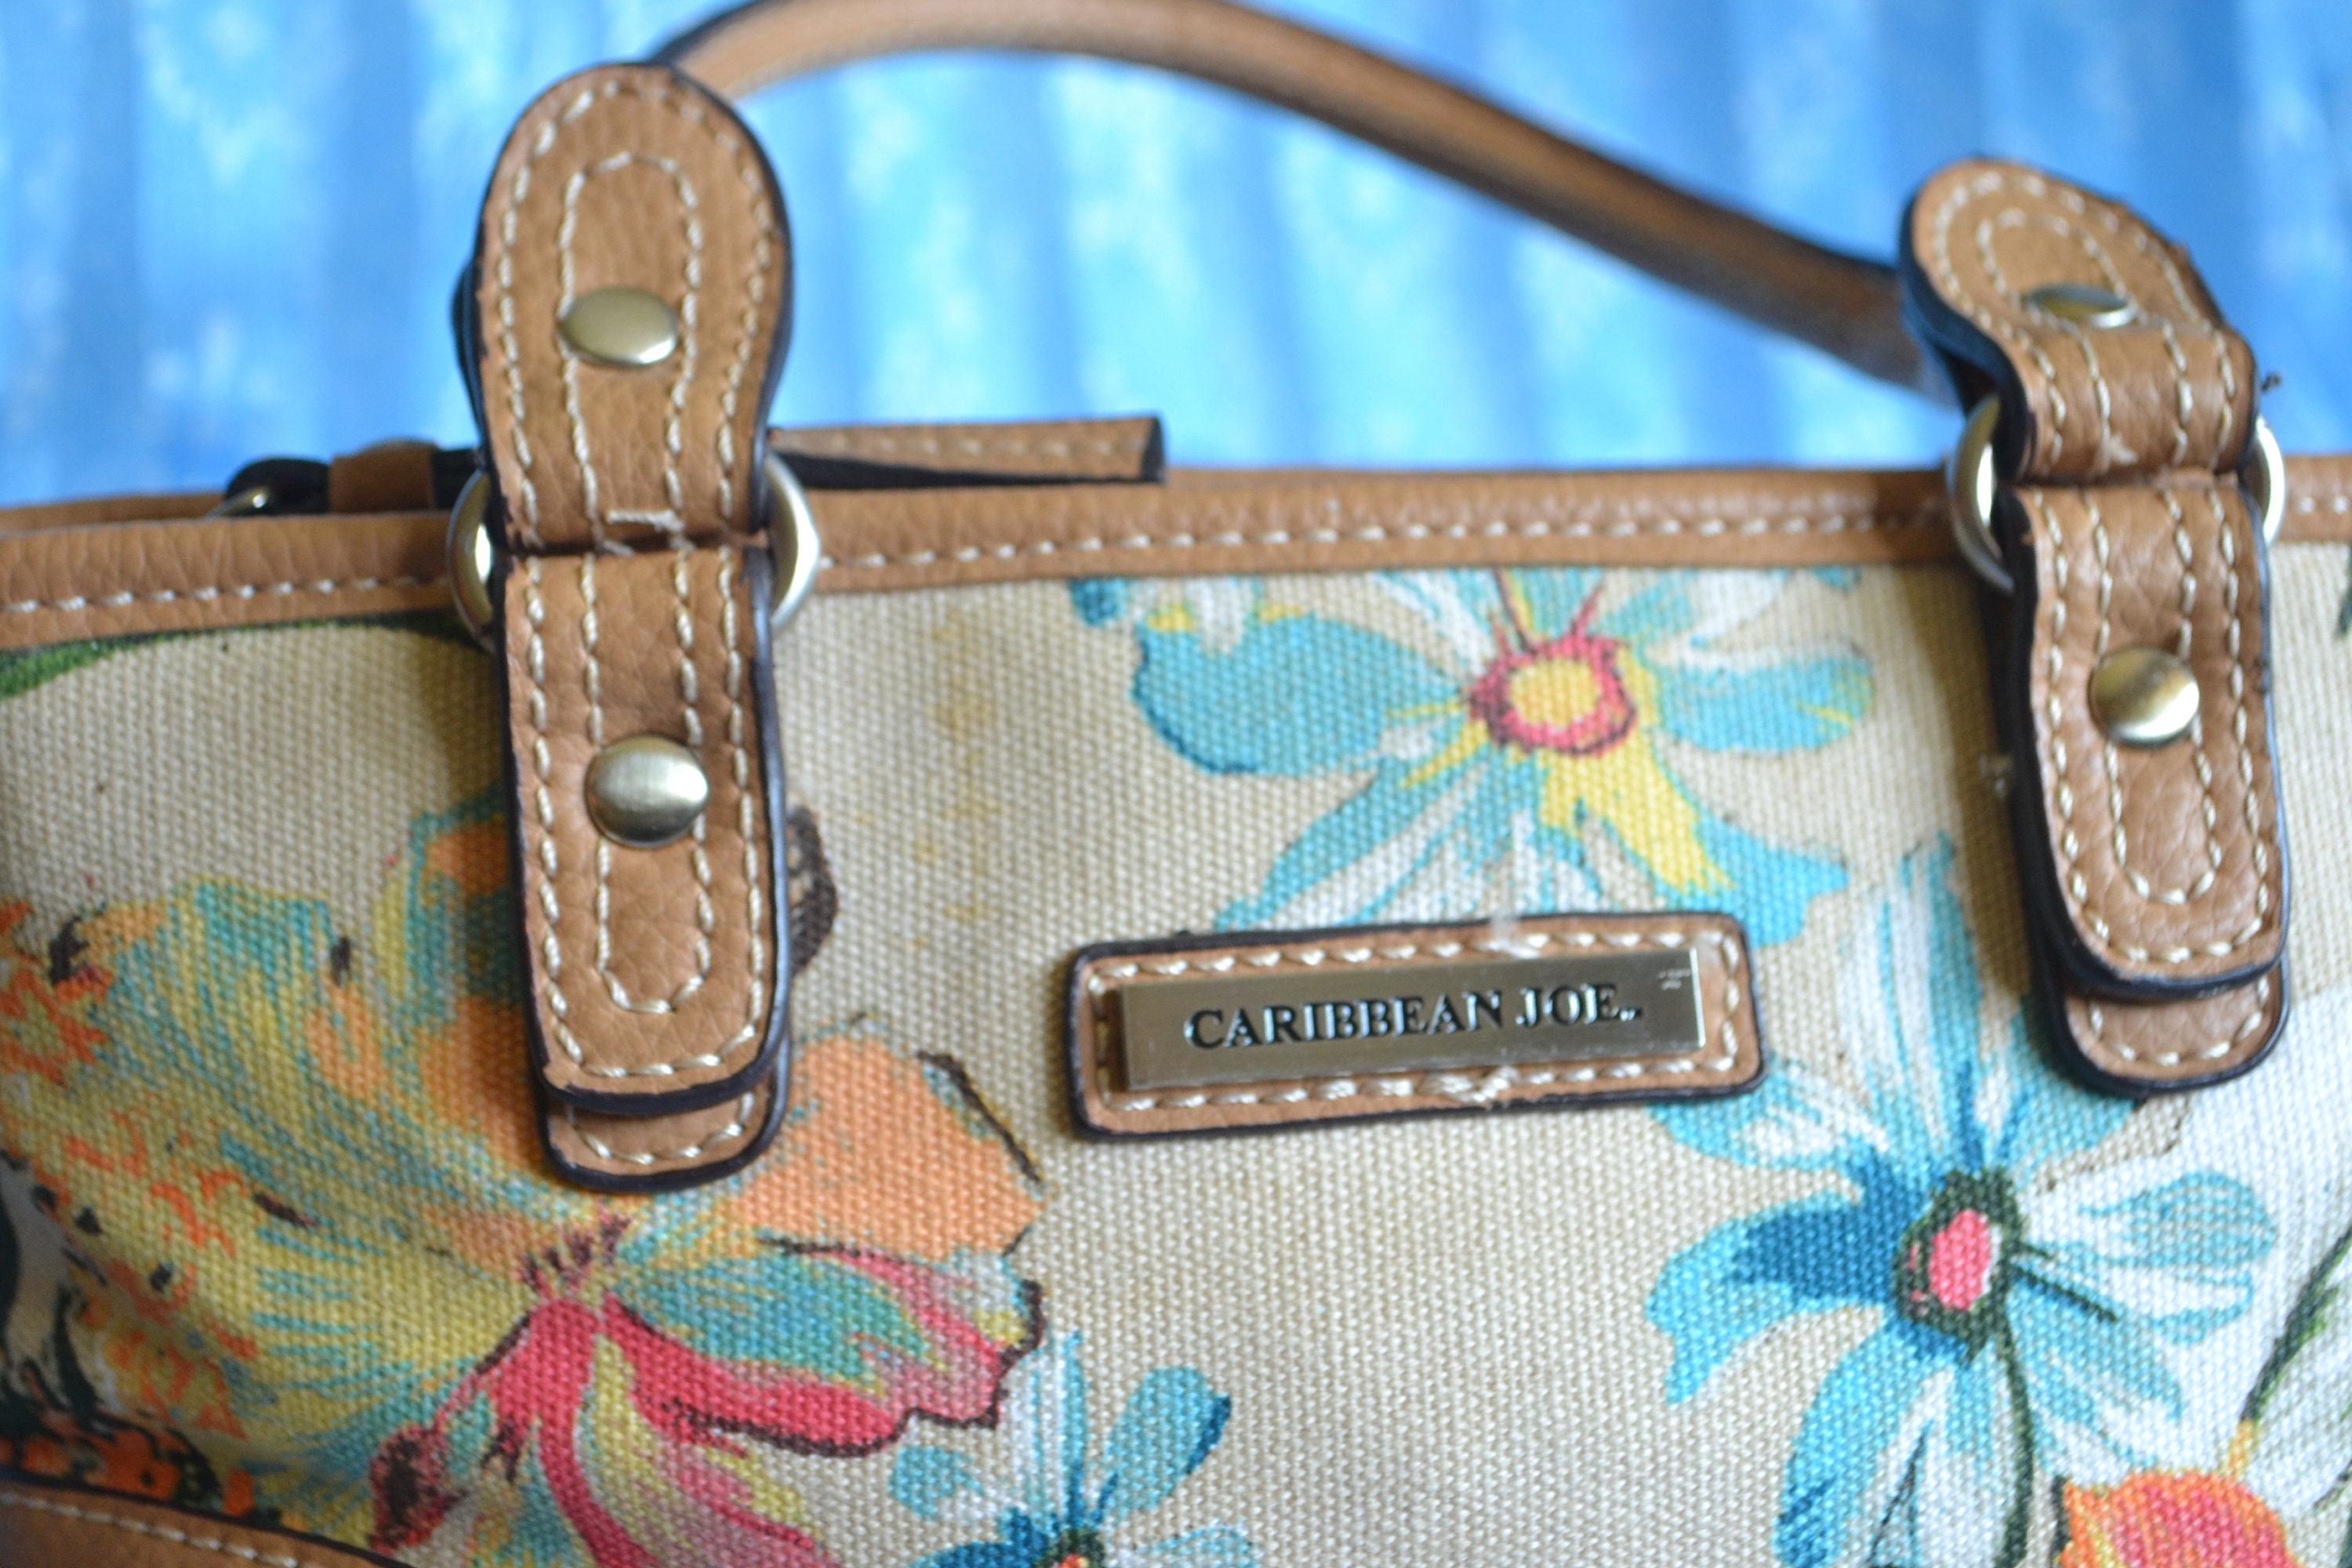 corners Floral fabric with tan faux leather on bottom top edge and double handles. Caribbean Joe handbag